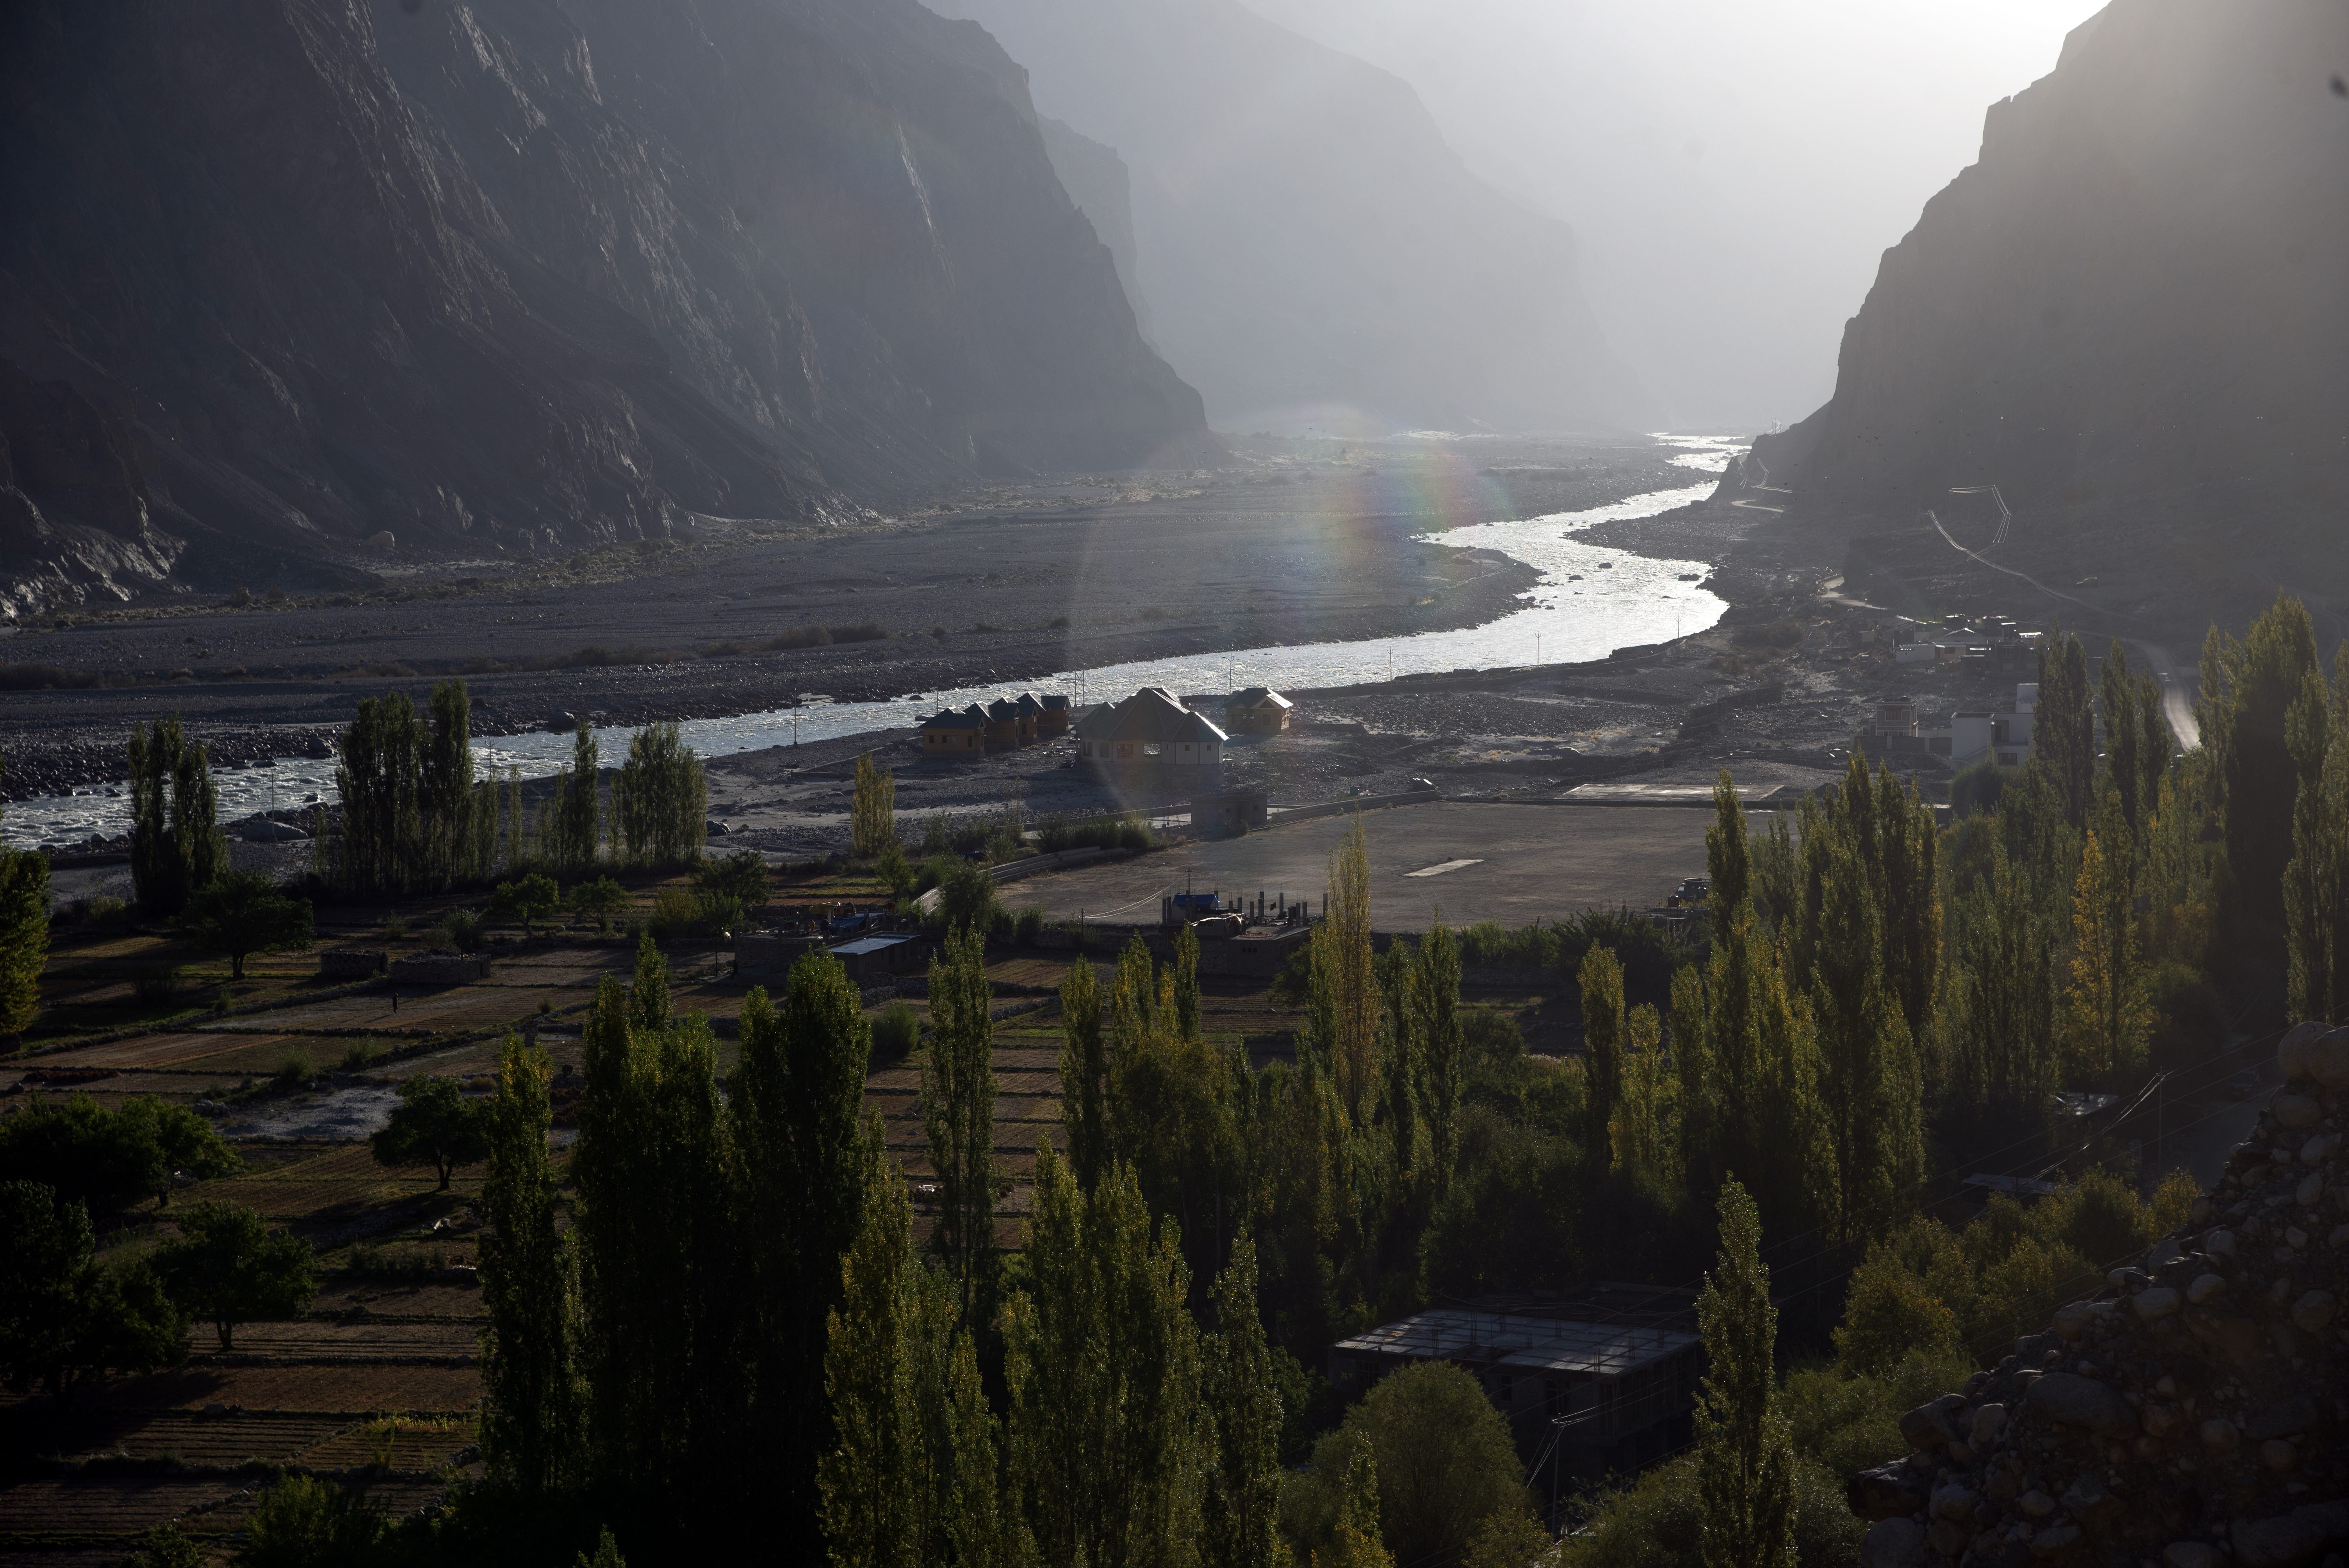 A river wides through a valley bottom flanked by mountains (image: Sugato Mukherjee)